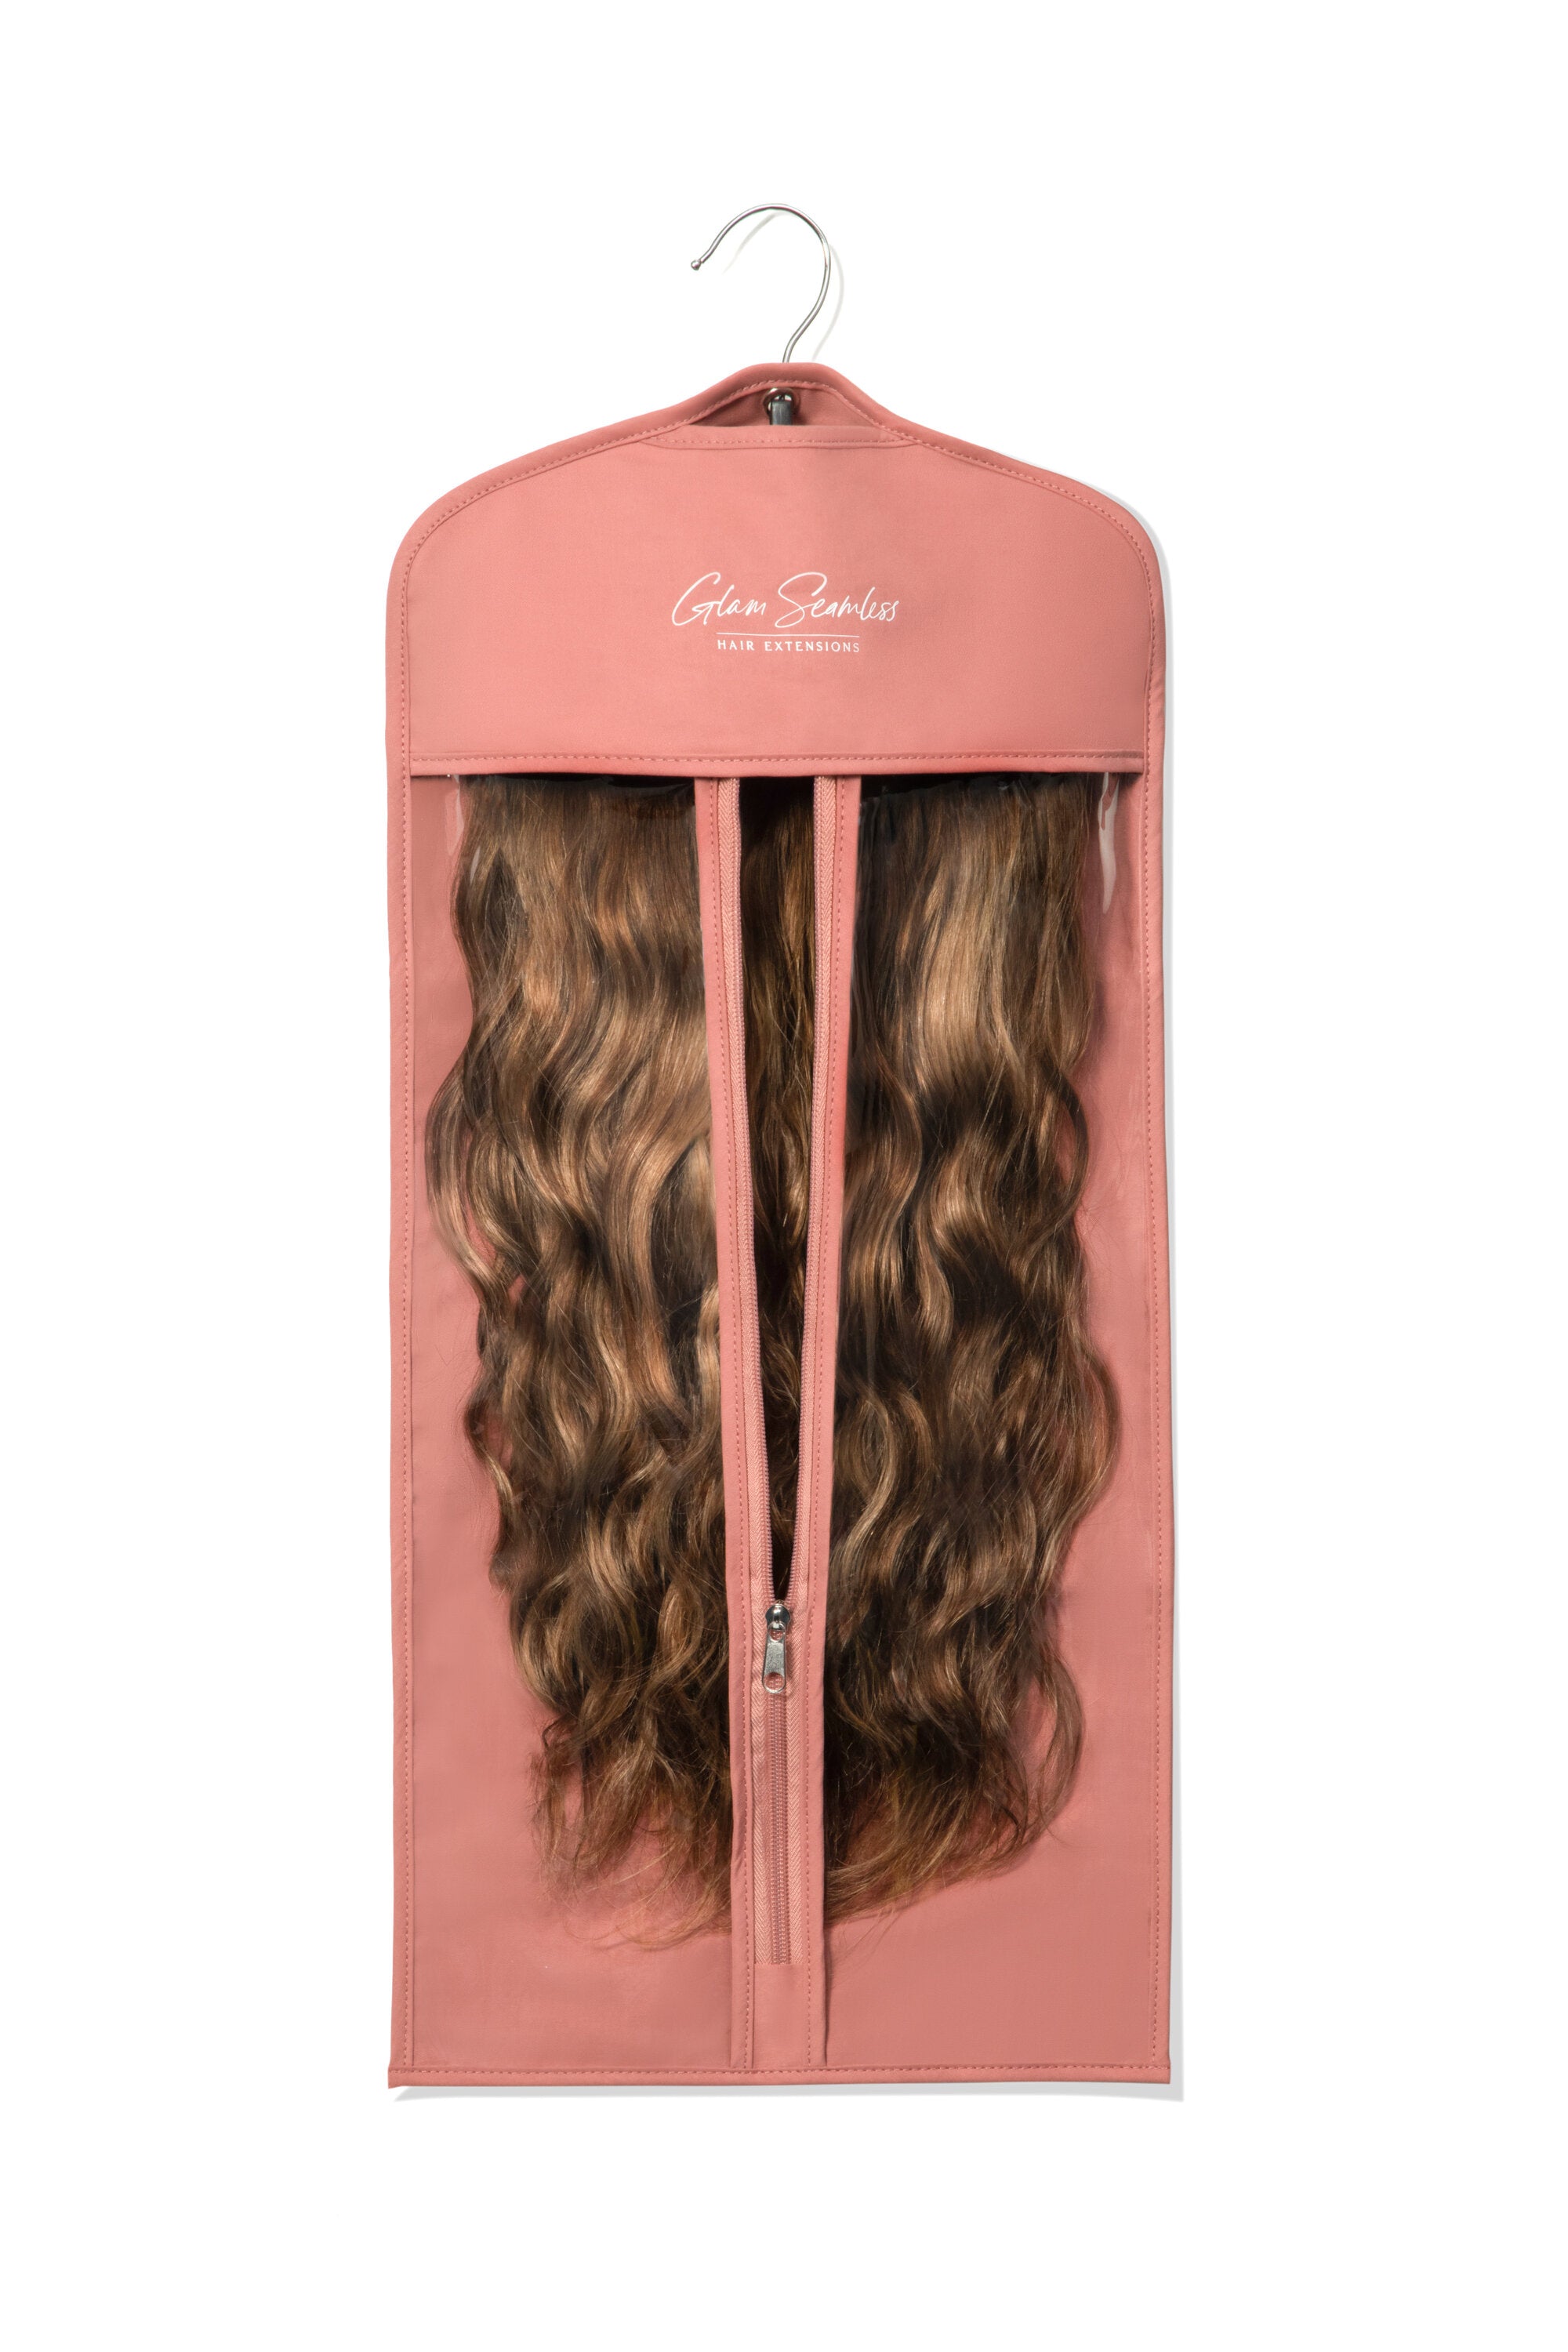 Luxe Hair Extension Storage & Travel Kit by Glam Seamless